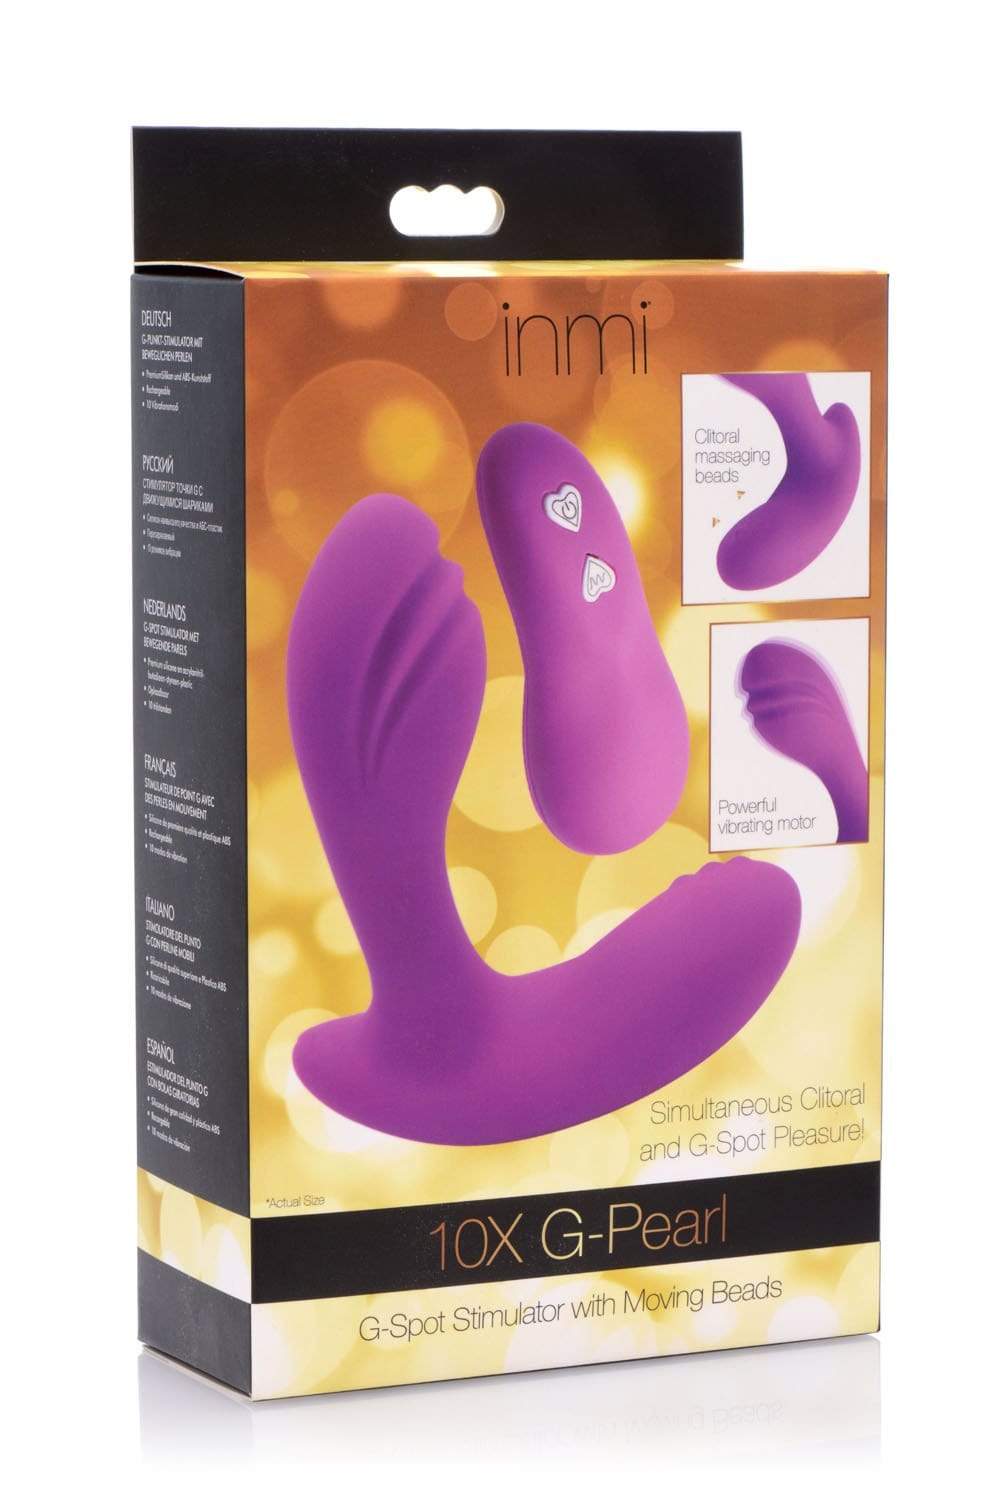 10x g pearl g spot stimulator with moving beads